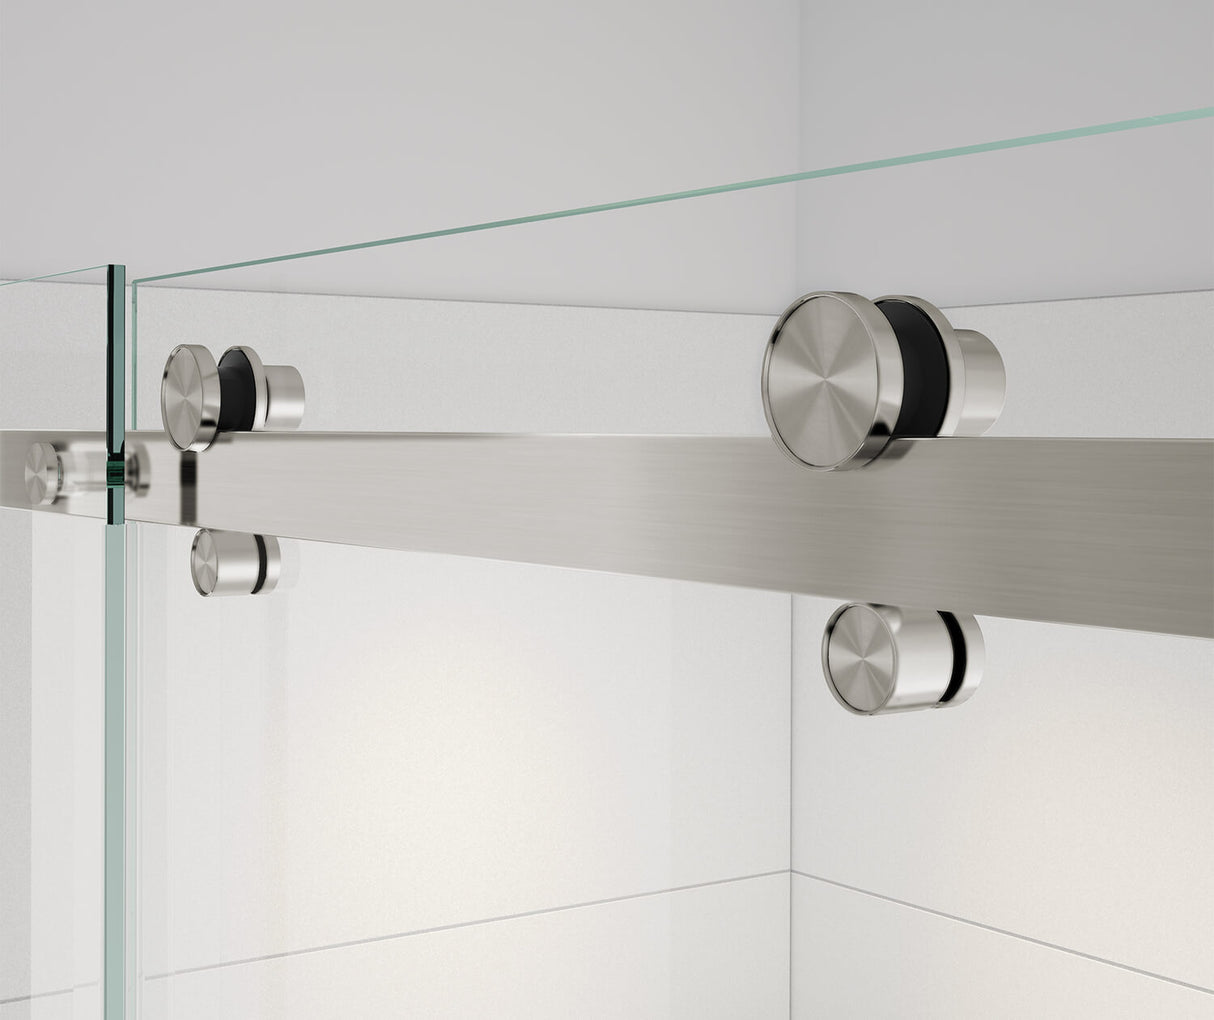 MAAX 138465-900-305-000 Vela 44 ½-47 x 78 ¾ in. 8mm Sliding Shower Door with Towel Bar for Alcove Installation with Clear glass in Brushed Nickel